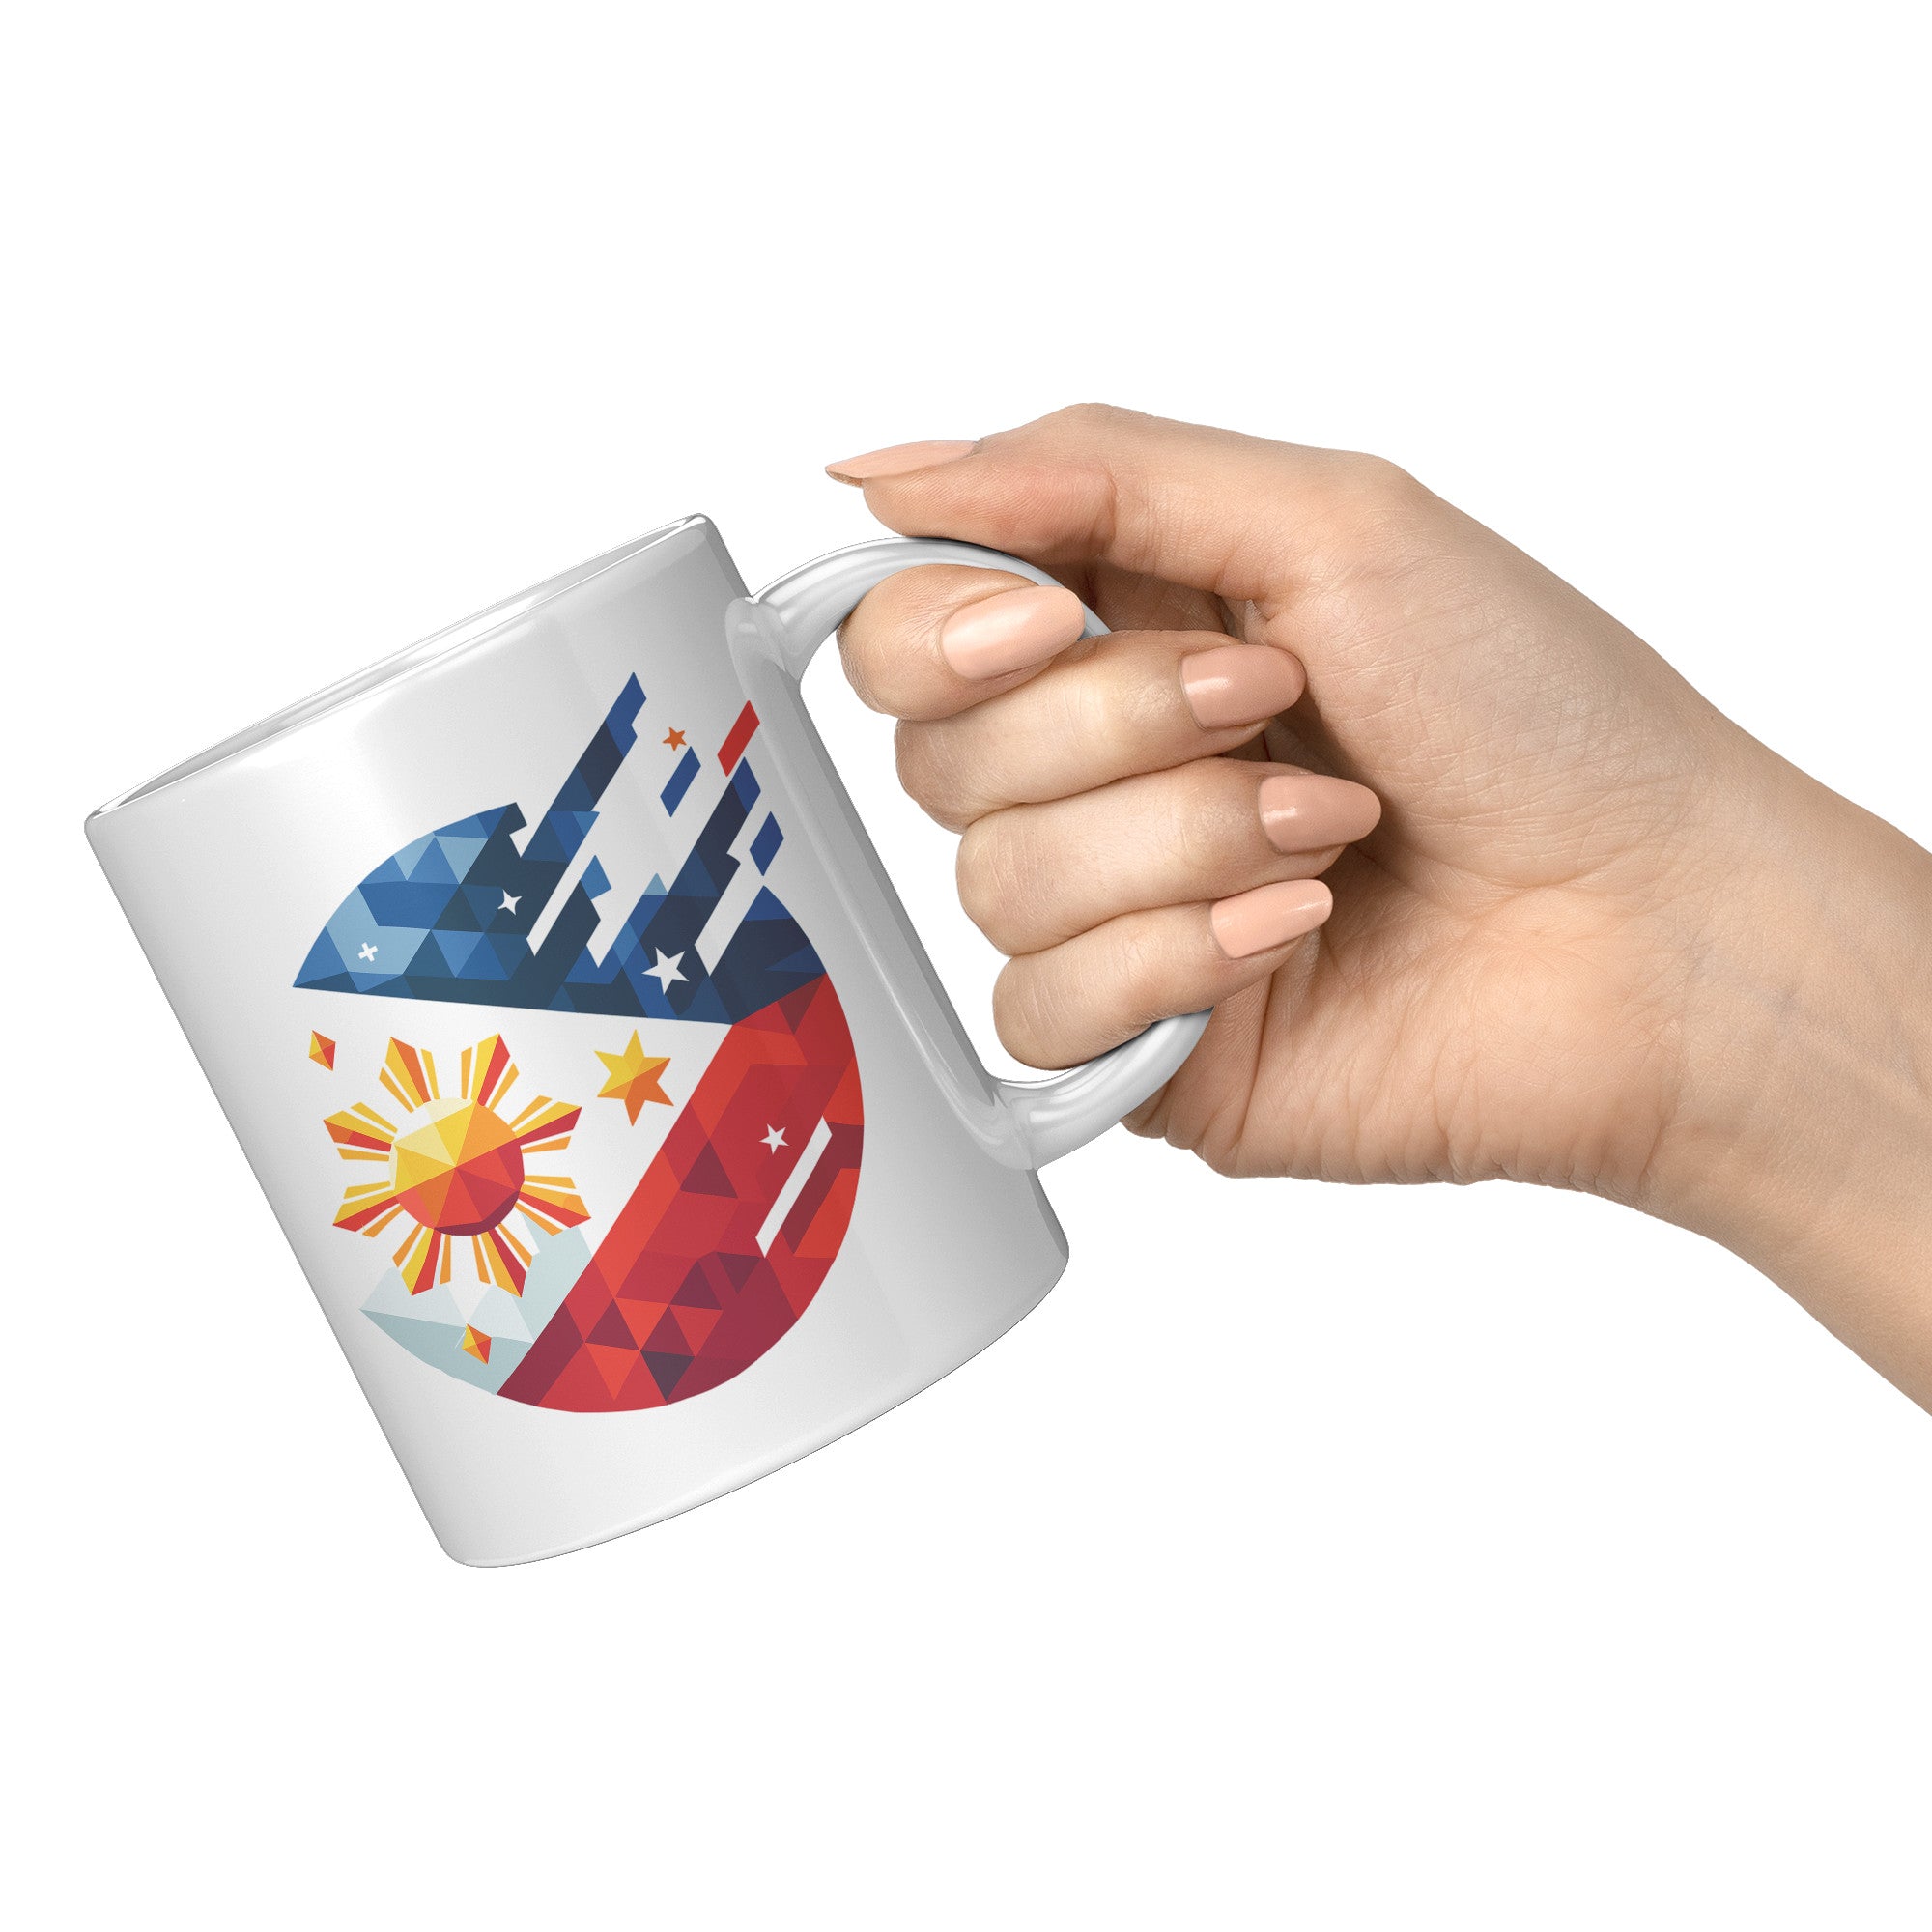 Proudly Pinoy Coffee Mug - Vibrant Filipino Flag Design - Patriotic Gift for Filipinos - Celebrate Heritage with Every Sip!" - B